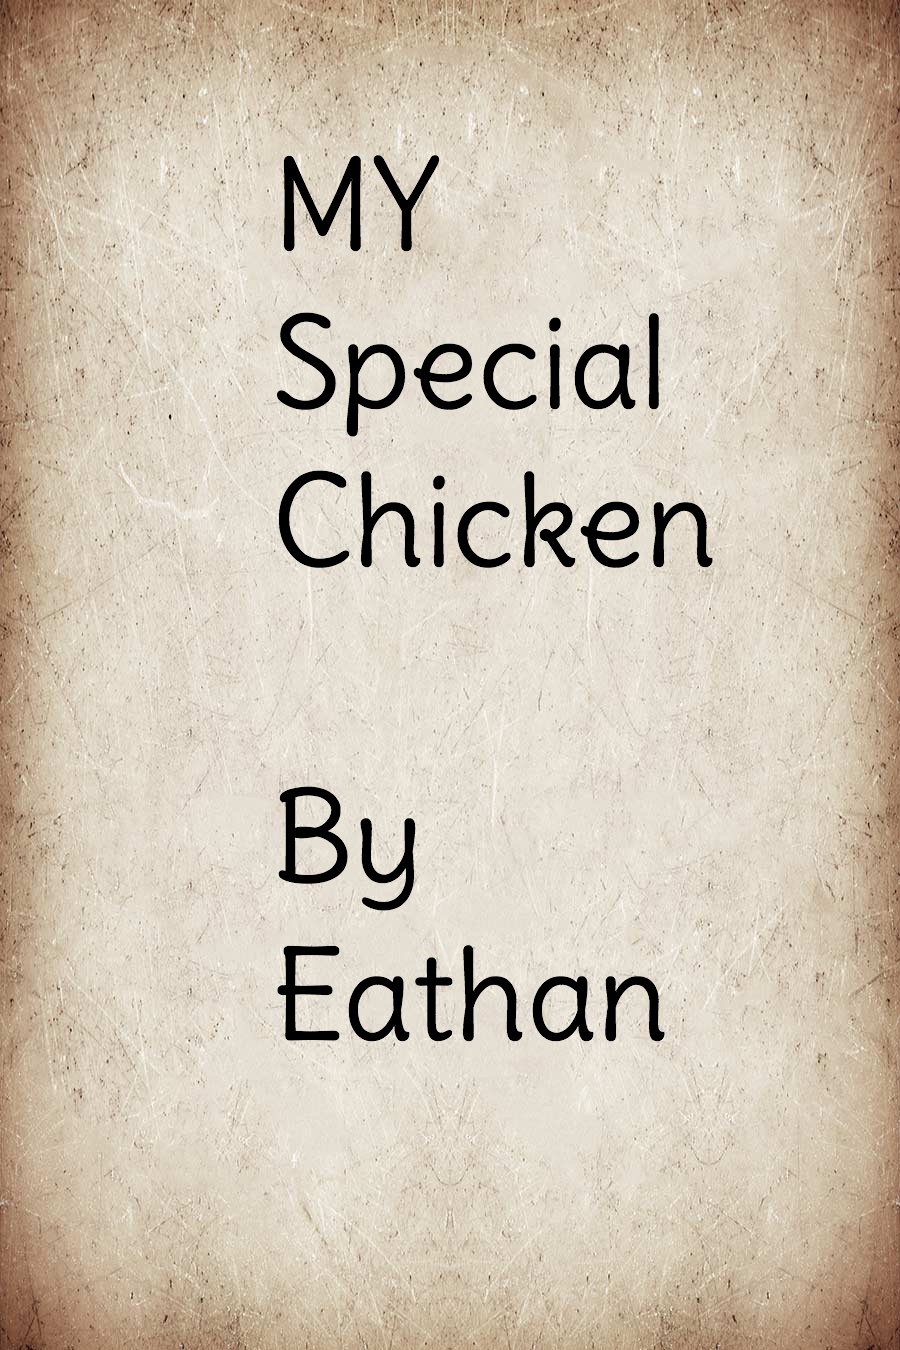 My Special Chicken by Ethan D